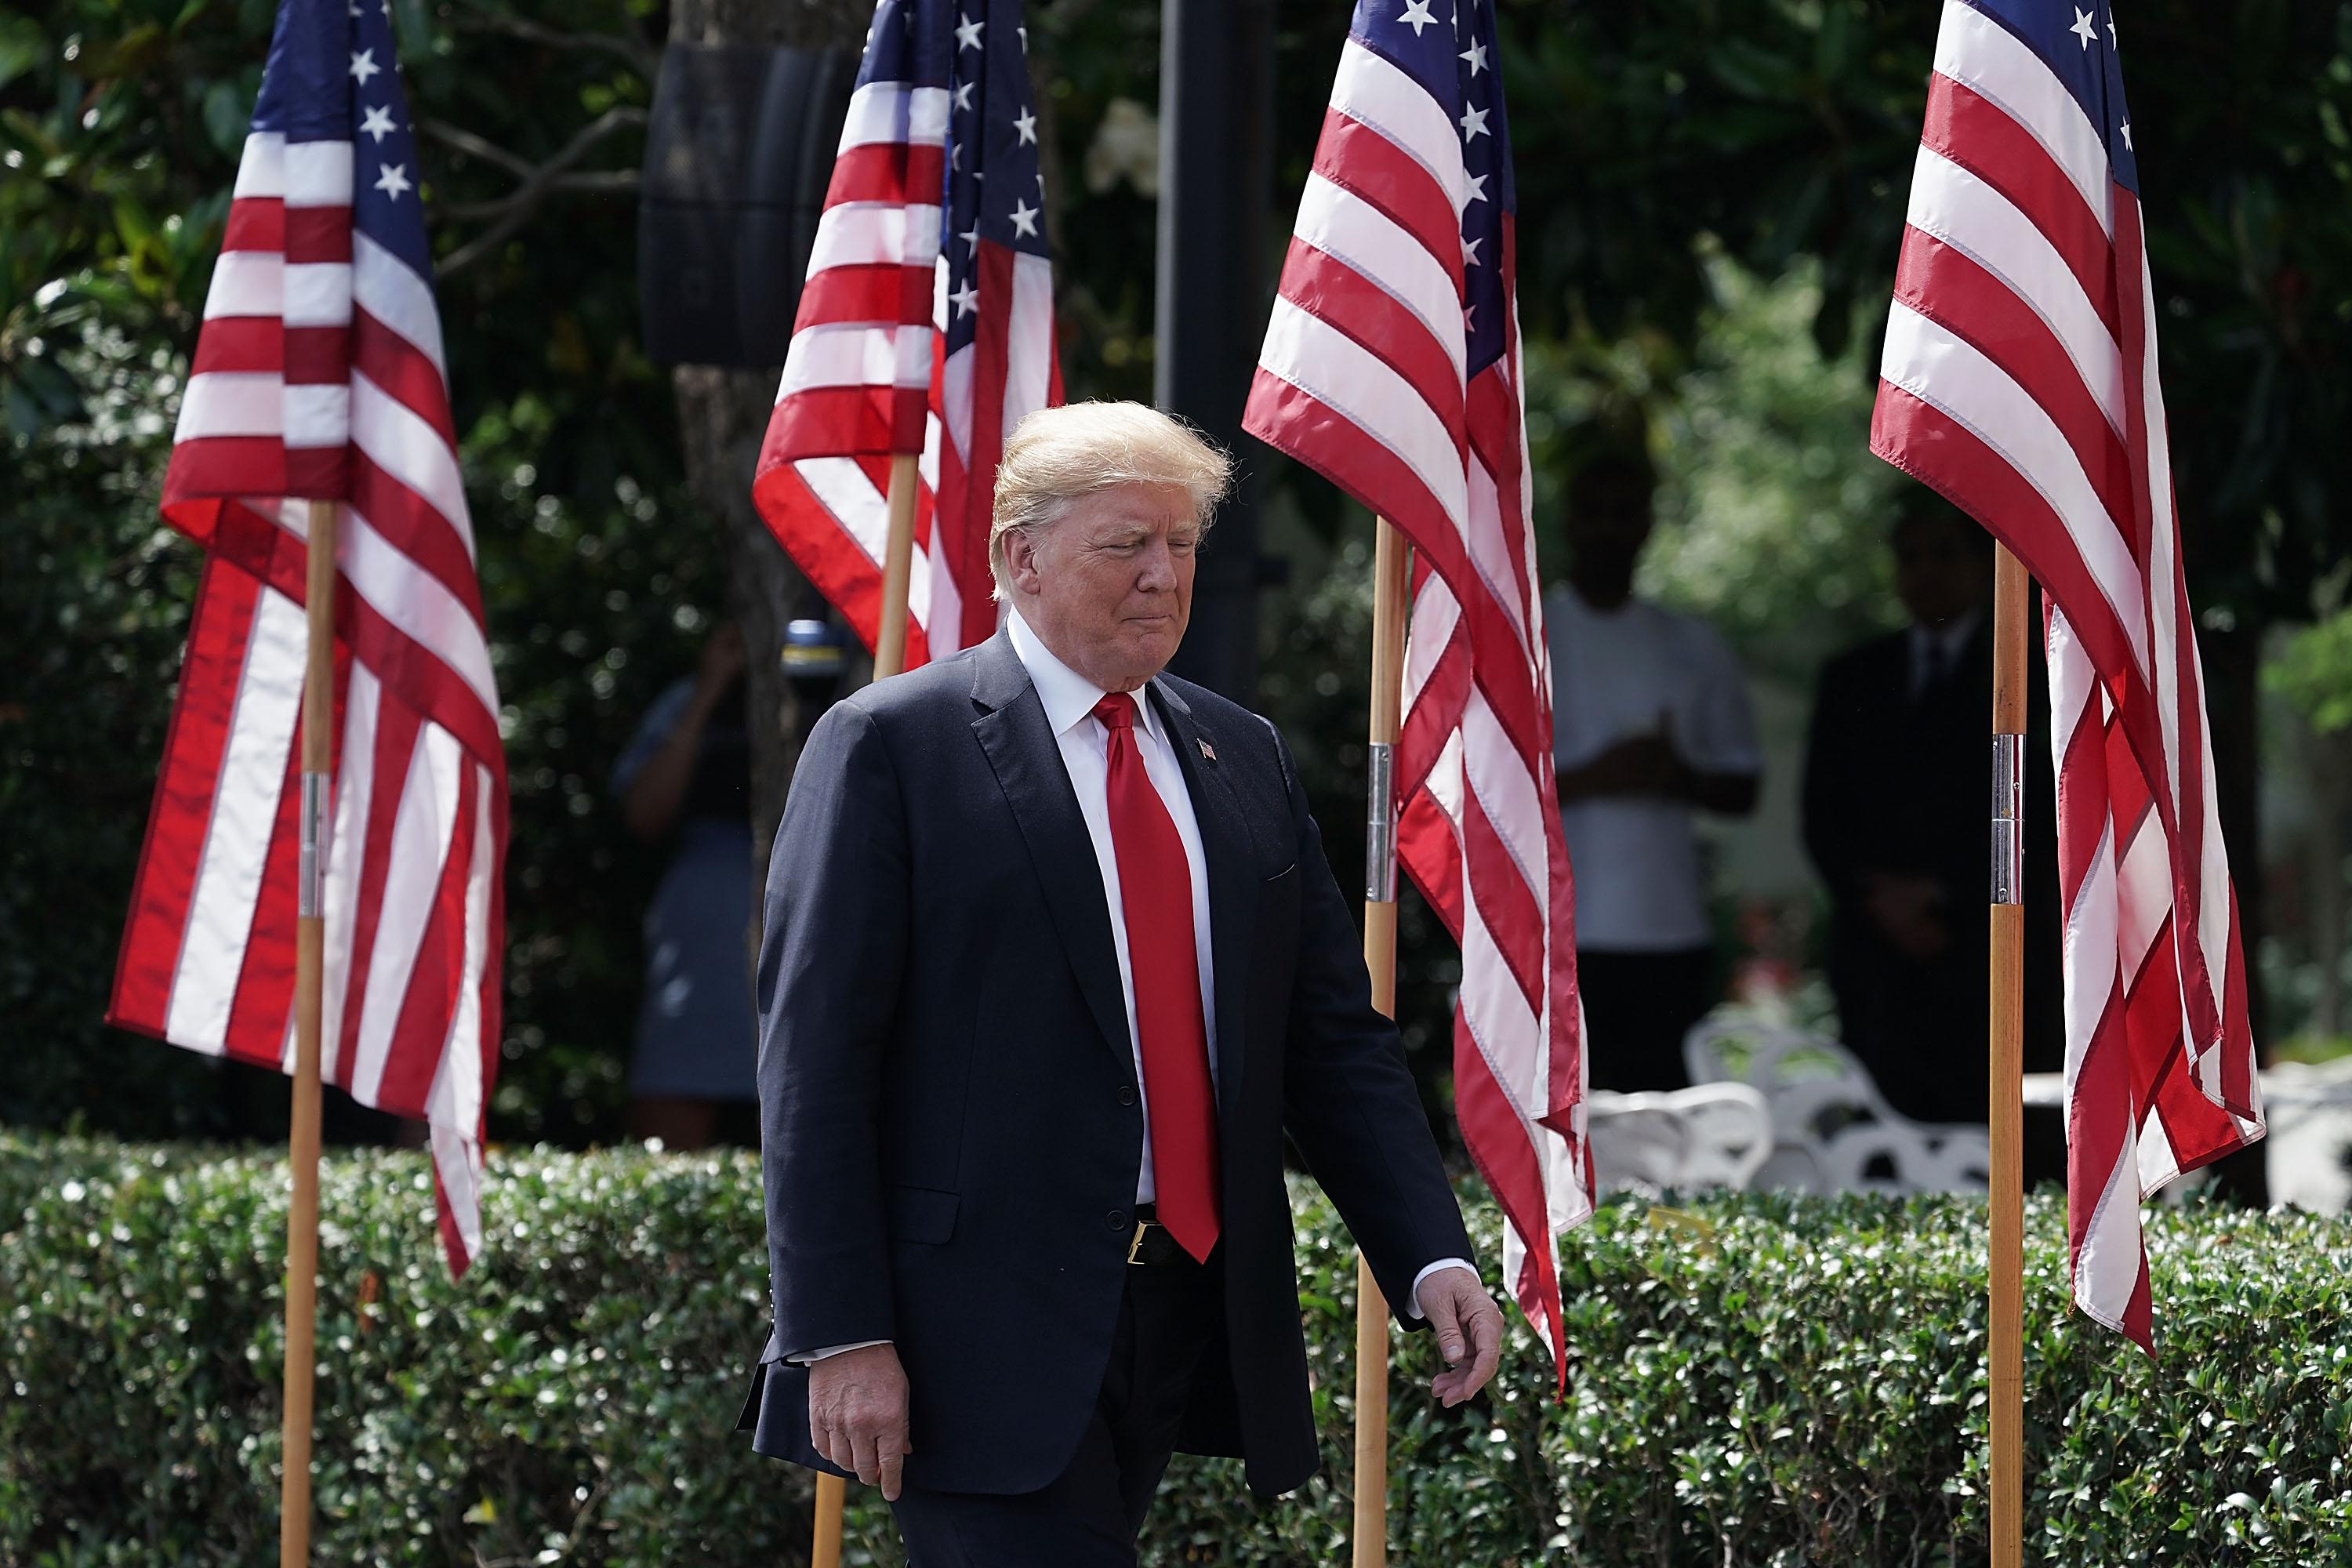 WASHINGTON, DC - JUNE 05:  U.S. President Donald Trump arrives at a 'Celebration of America' event on the south lawn of the White House June 5, 2018 in Washington, DC. The event, originally intended to honor the Super Bowl champion Philadelphia Eagles, was changed after the majority of the team declined to attend the event due to a disagreement with Trump over NFL players kneeling during the national anthem.  (Photo by Alex Wong/Getty Images)